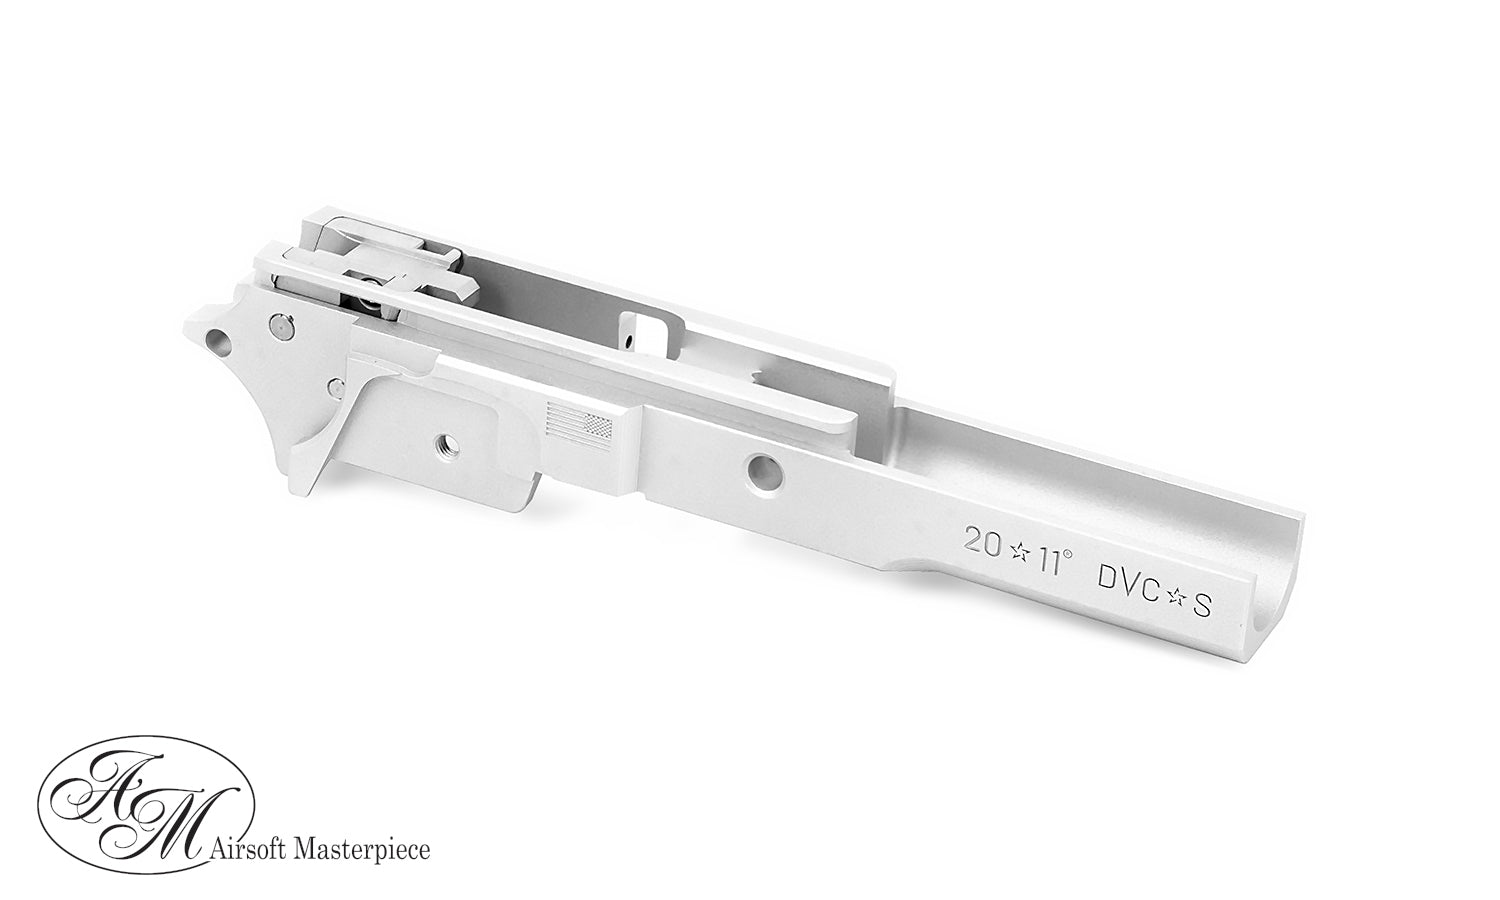 Airsoft Masterpiece DVC STEEL 3.9" Aluminum Advance Frame For Hi-Capa 5.1 #F-ST39DVCS-SL Silver